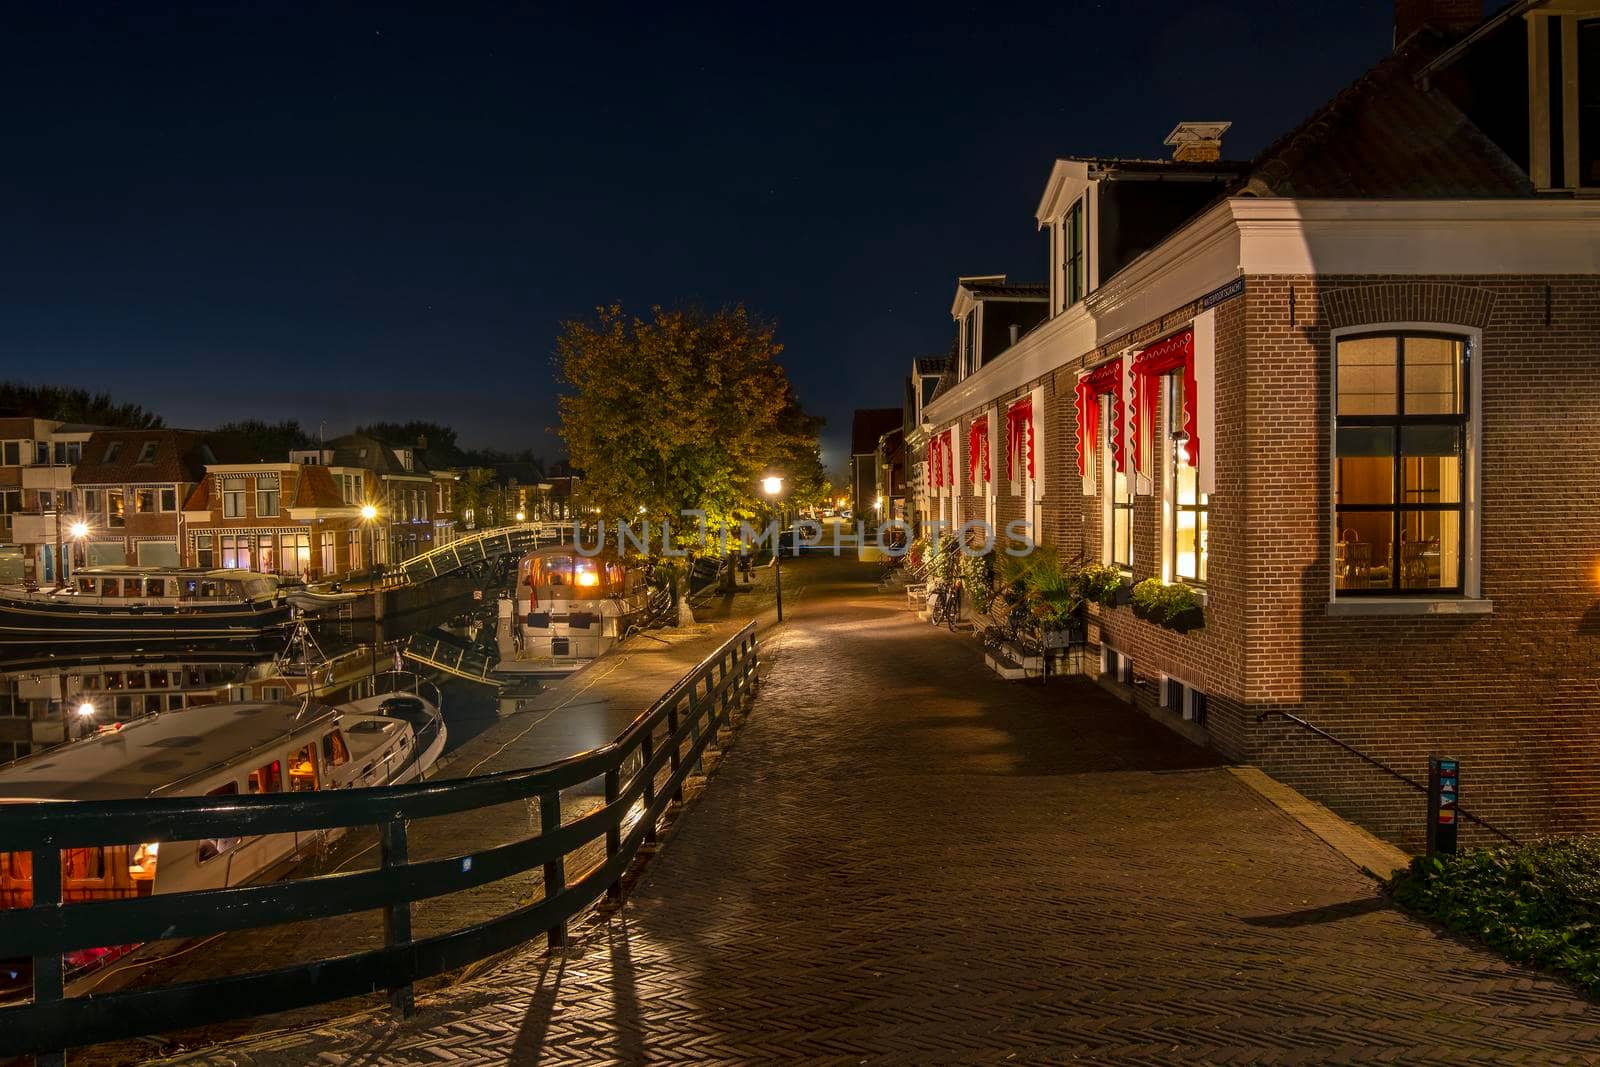 Historical city Sneek by night in the Netherlands by devy